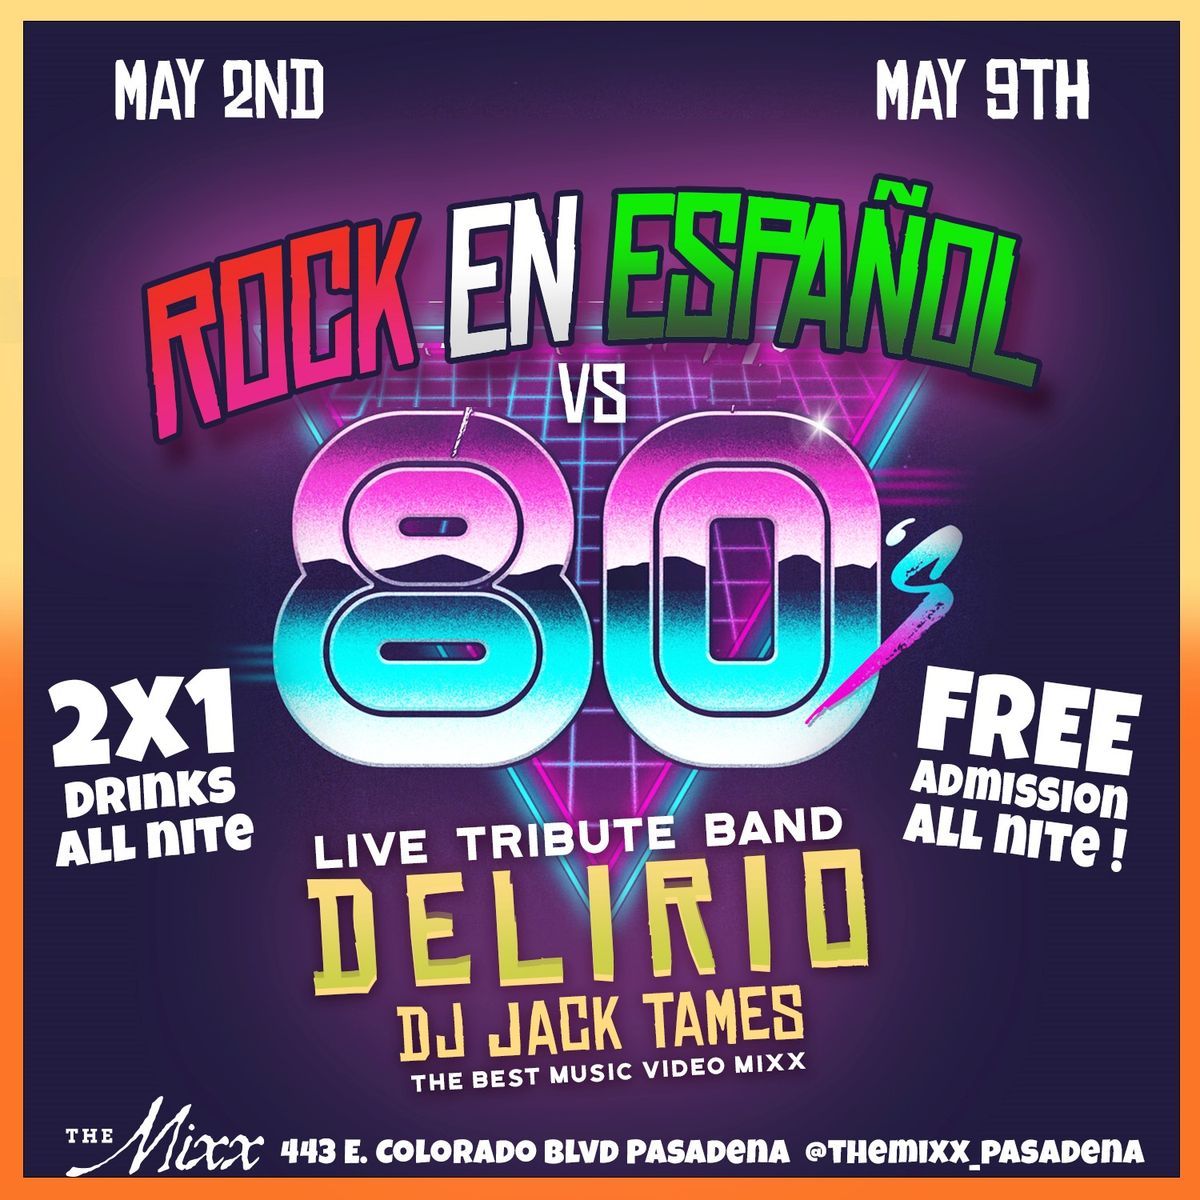 80\u2019s vs Rock En Espa\u00f1ol FREE Live Show and Dance Party